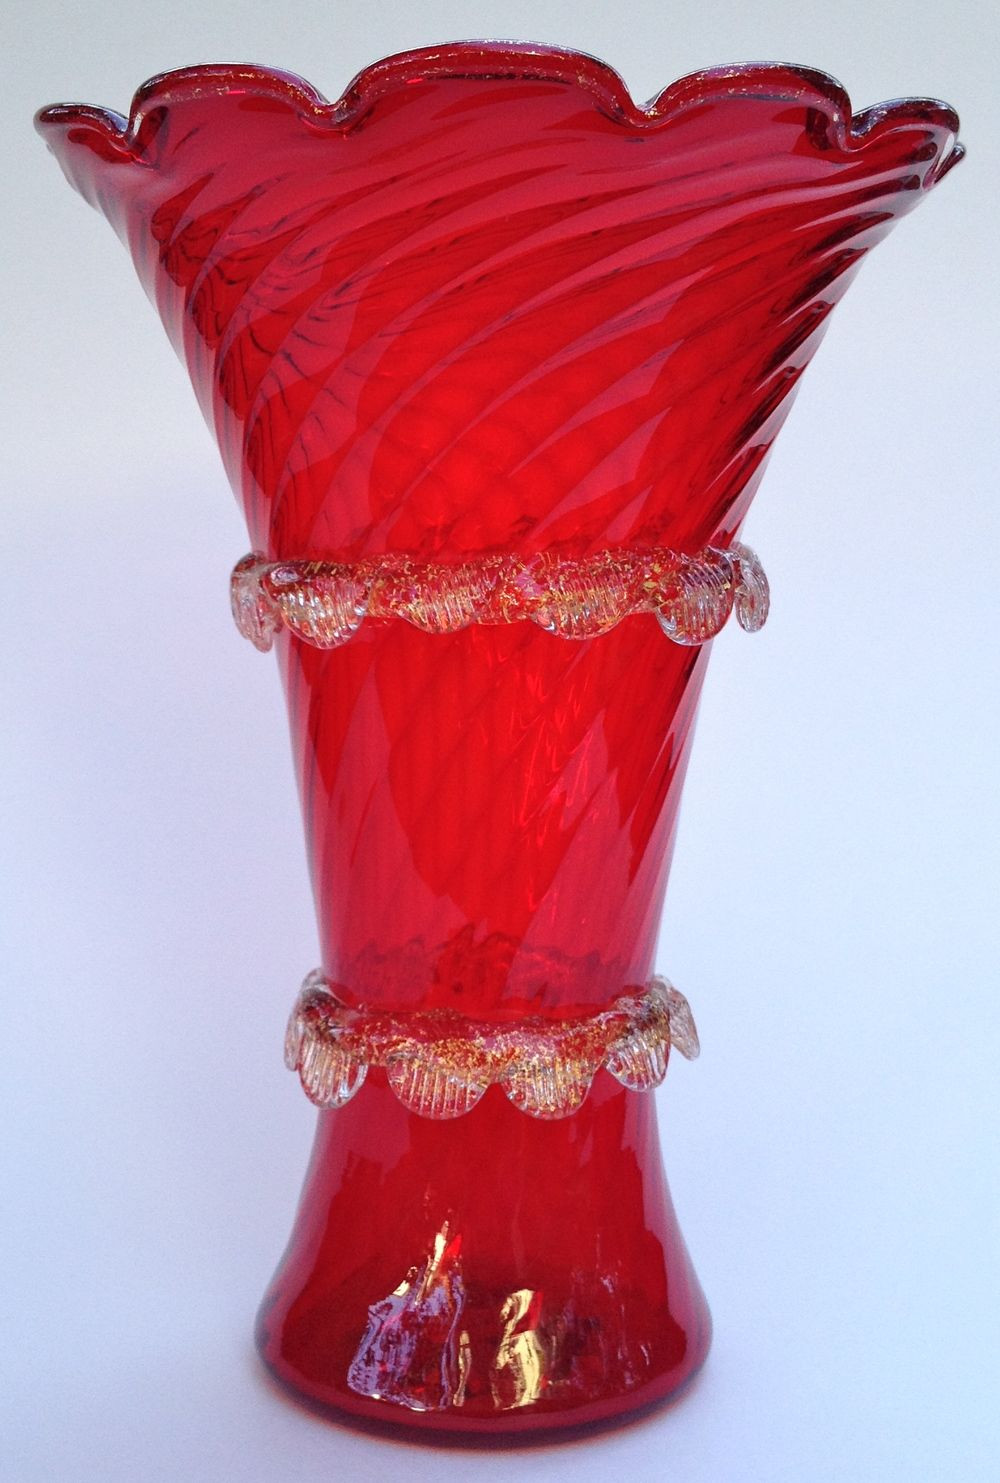 24 Cute Ruby Red Vase 2024 free download ruby red vase of ruby red murano mazzega vase c 1950s ruby red 14th century and italy with regard to ruby red murano mazzega vase c 1950s